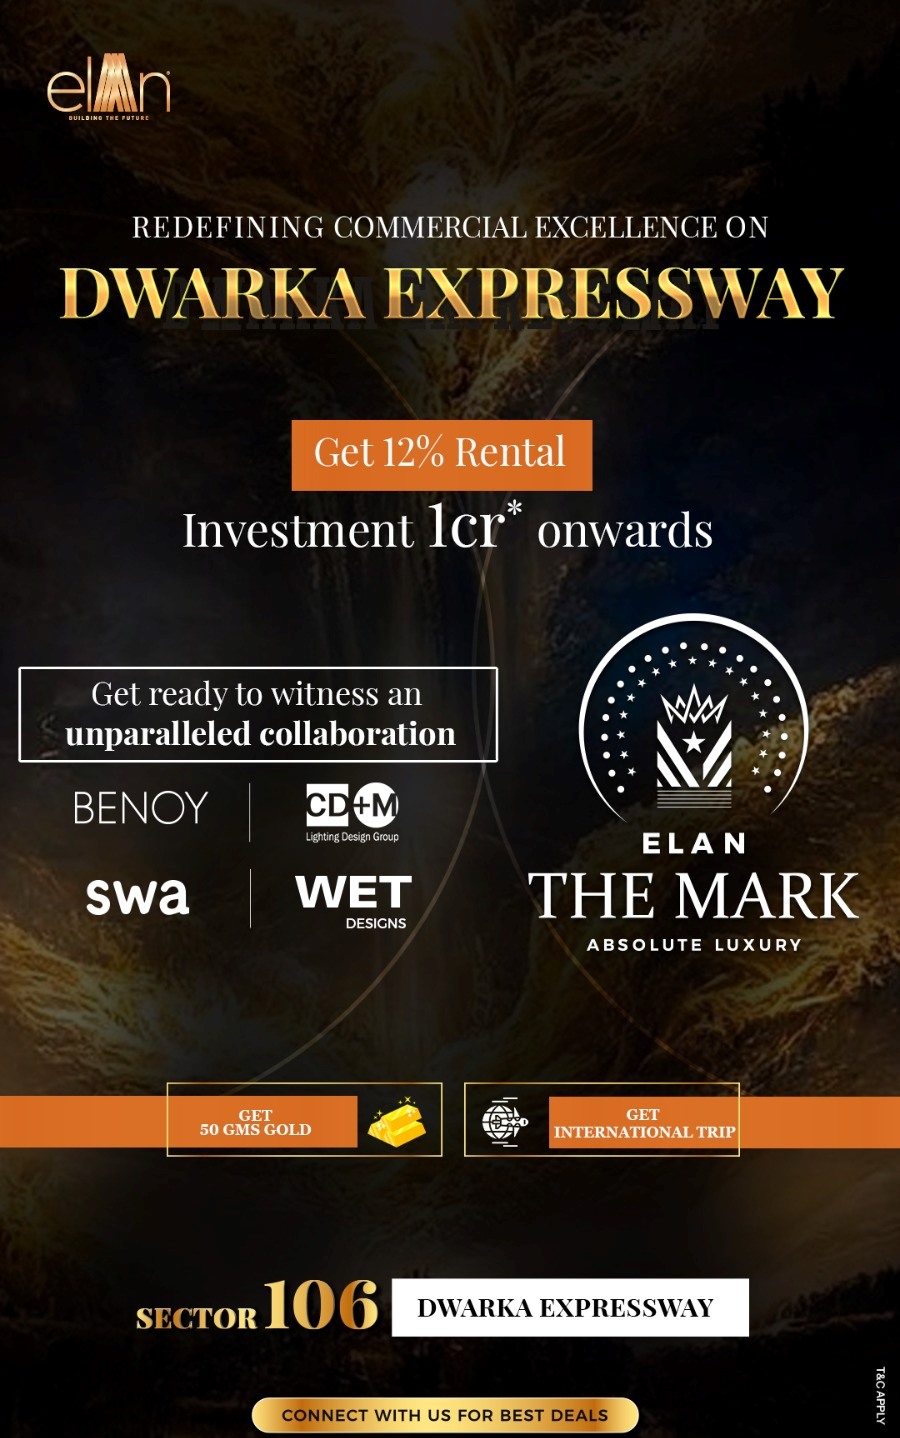 Get 12% rental and investment starts Rs 1Cr onwards at Elan The Mark in Sector 106, Gurgaon